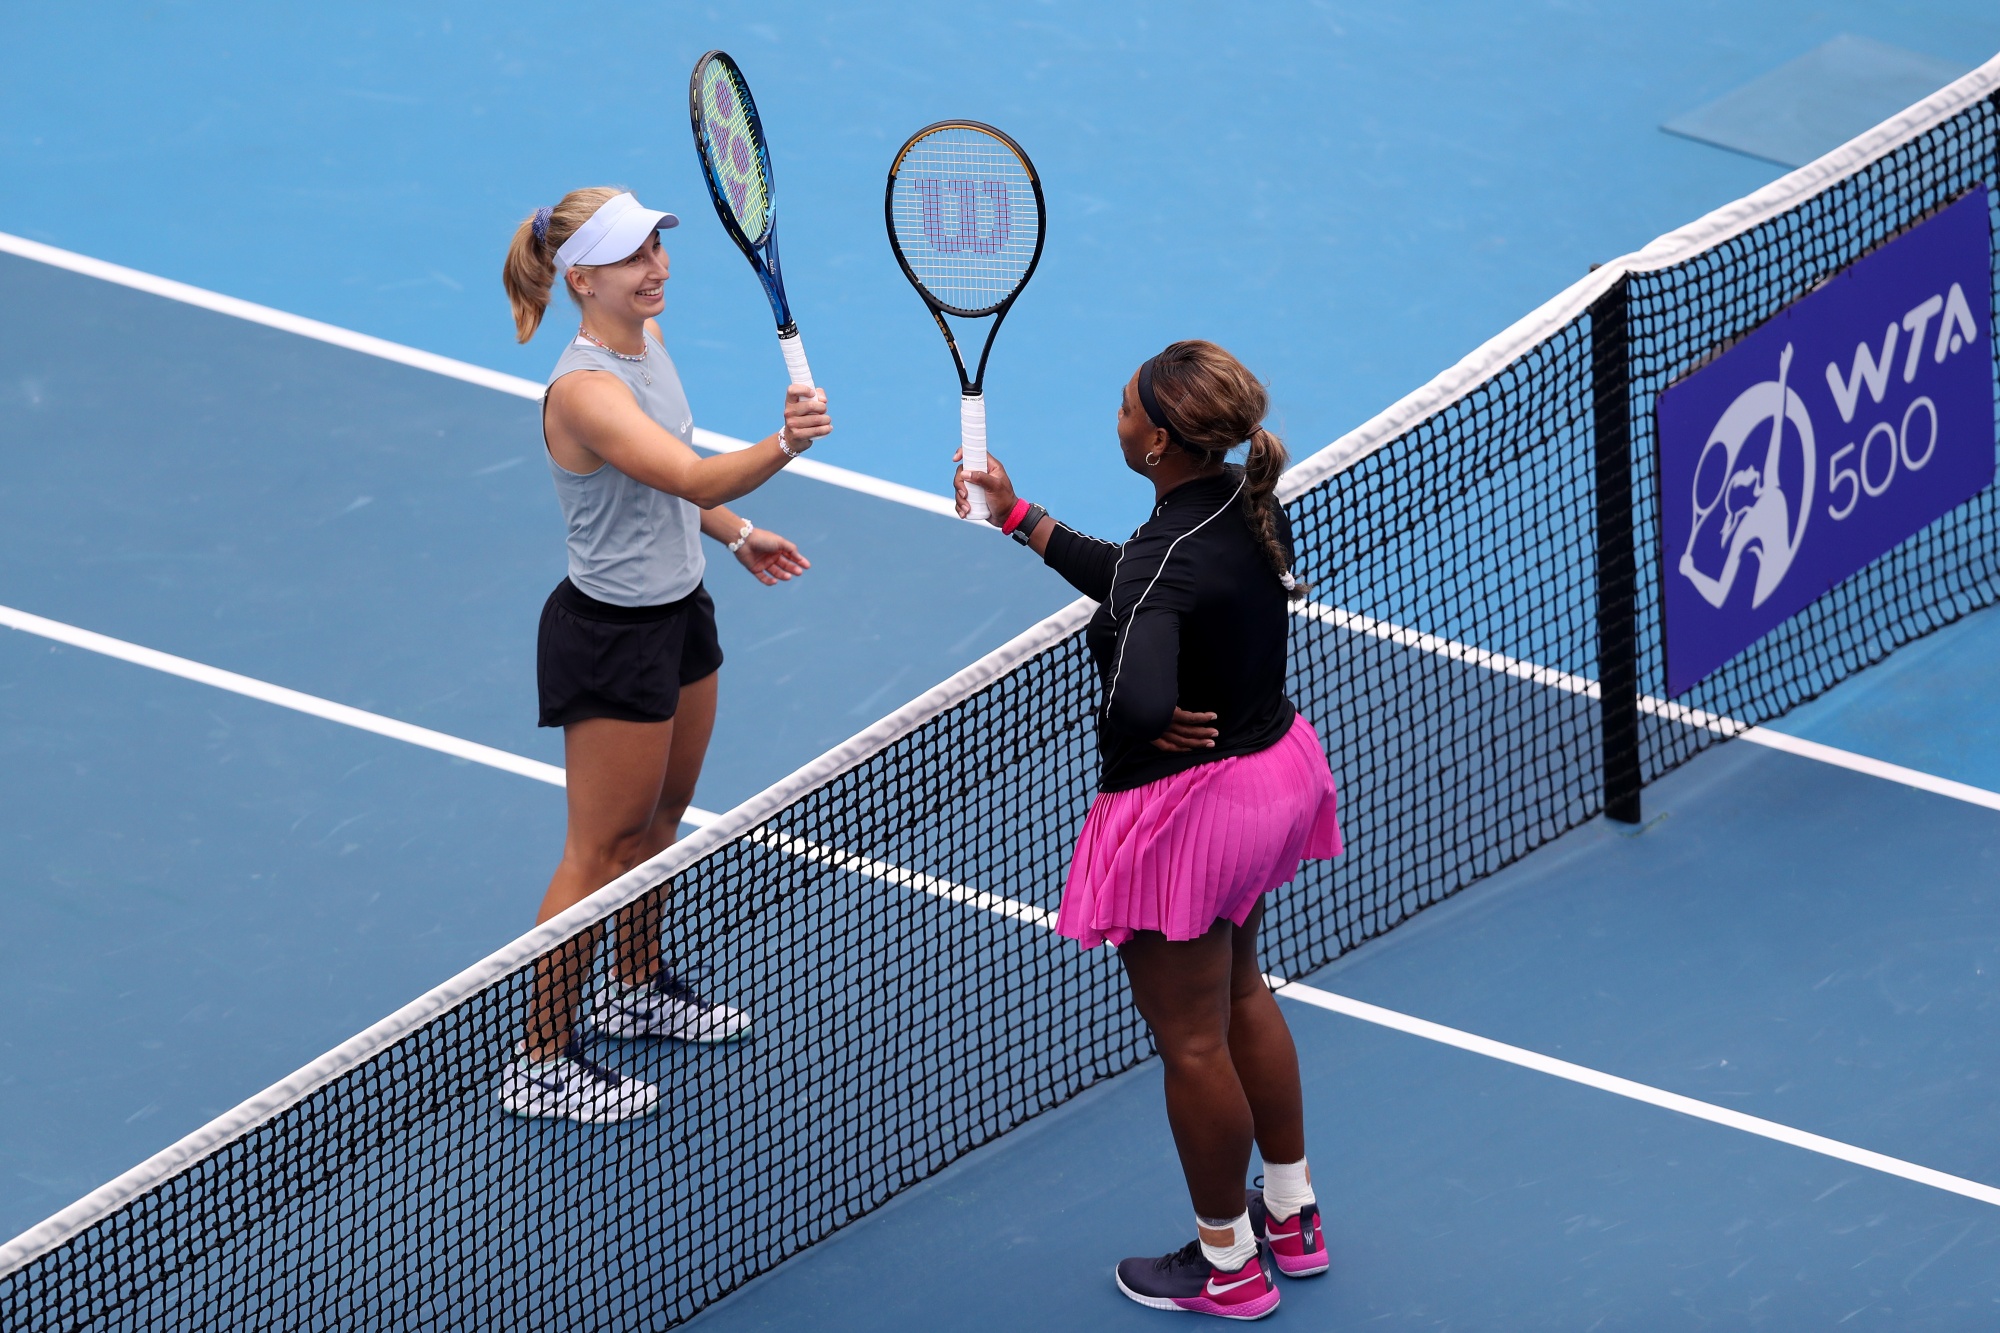 Womens Tennis Gets $150 Million Investment From CVC Capital